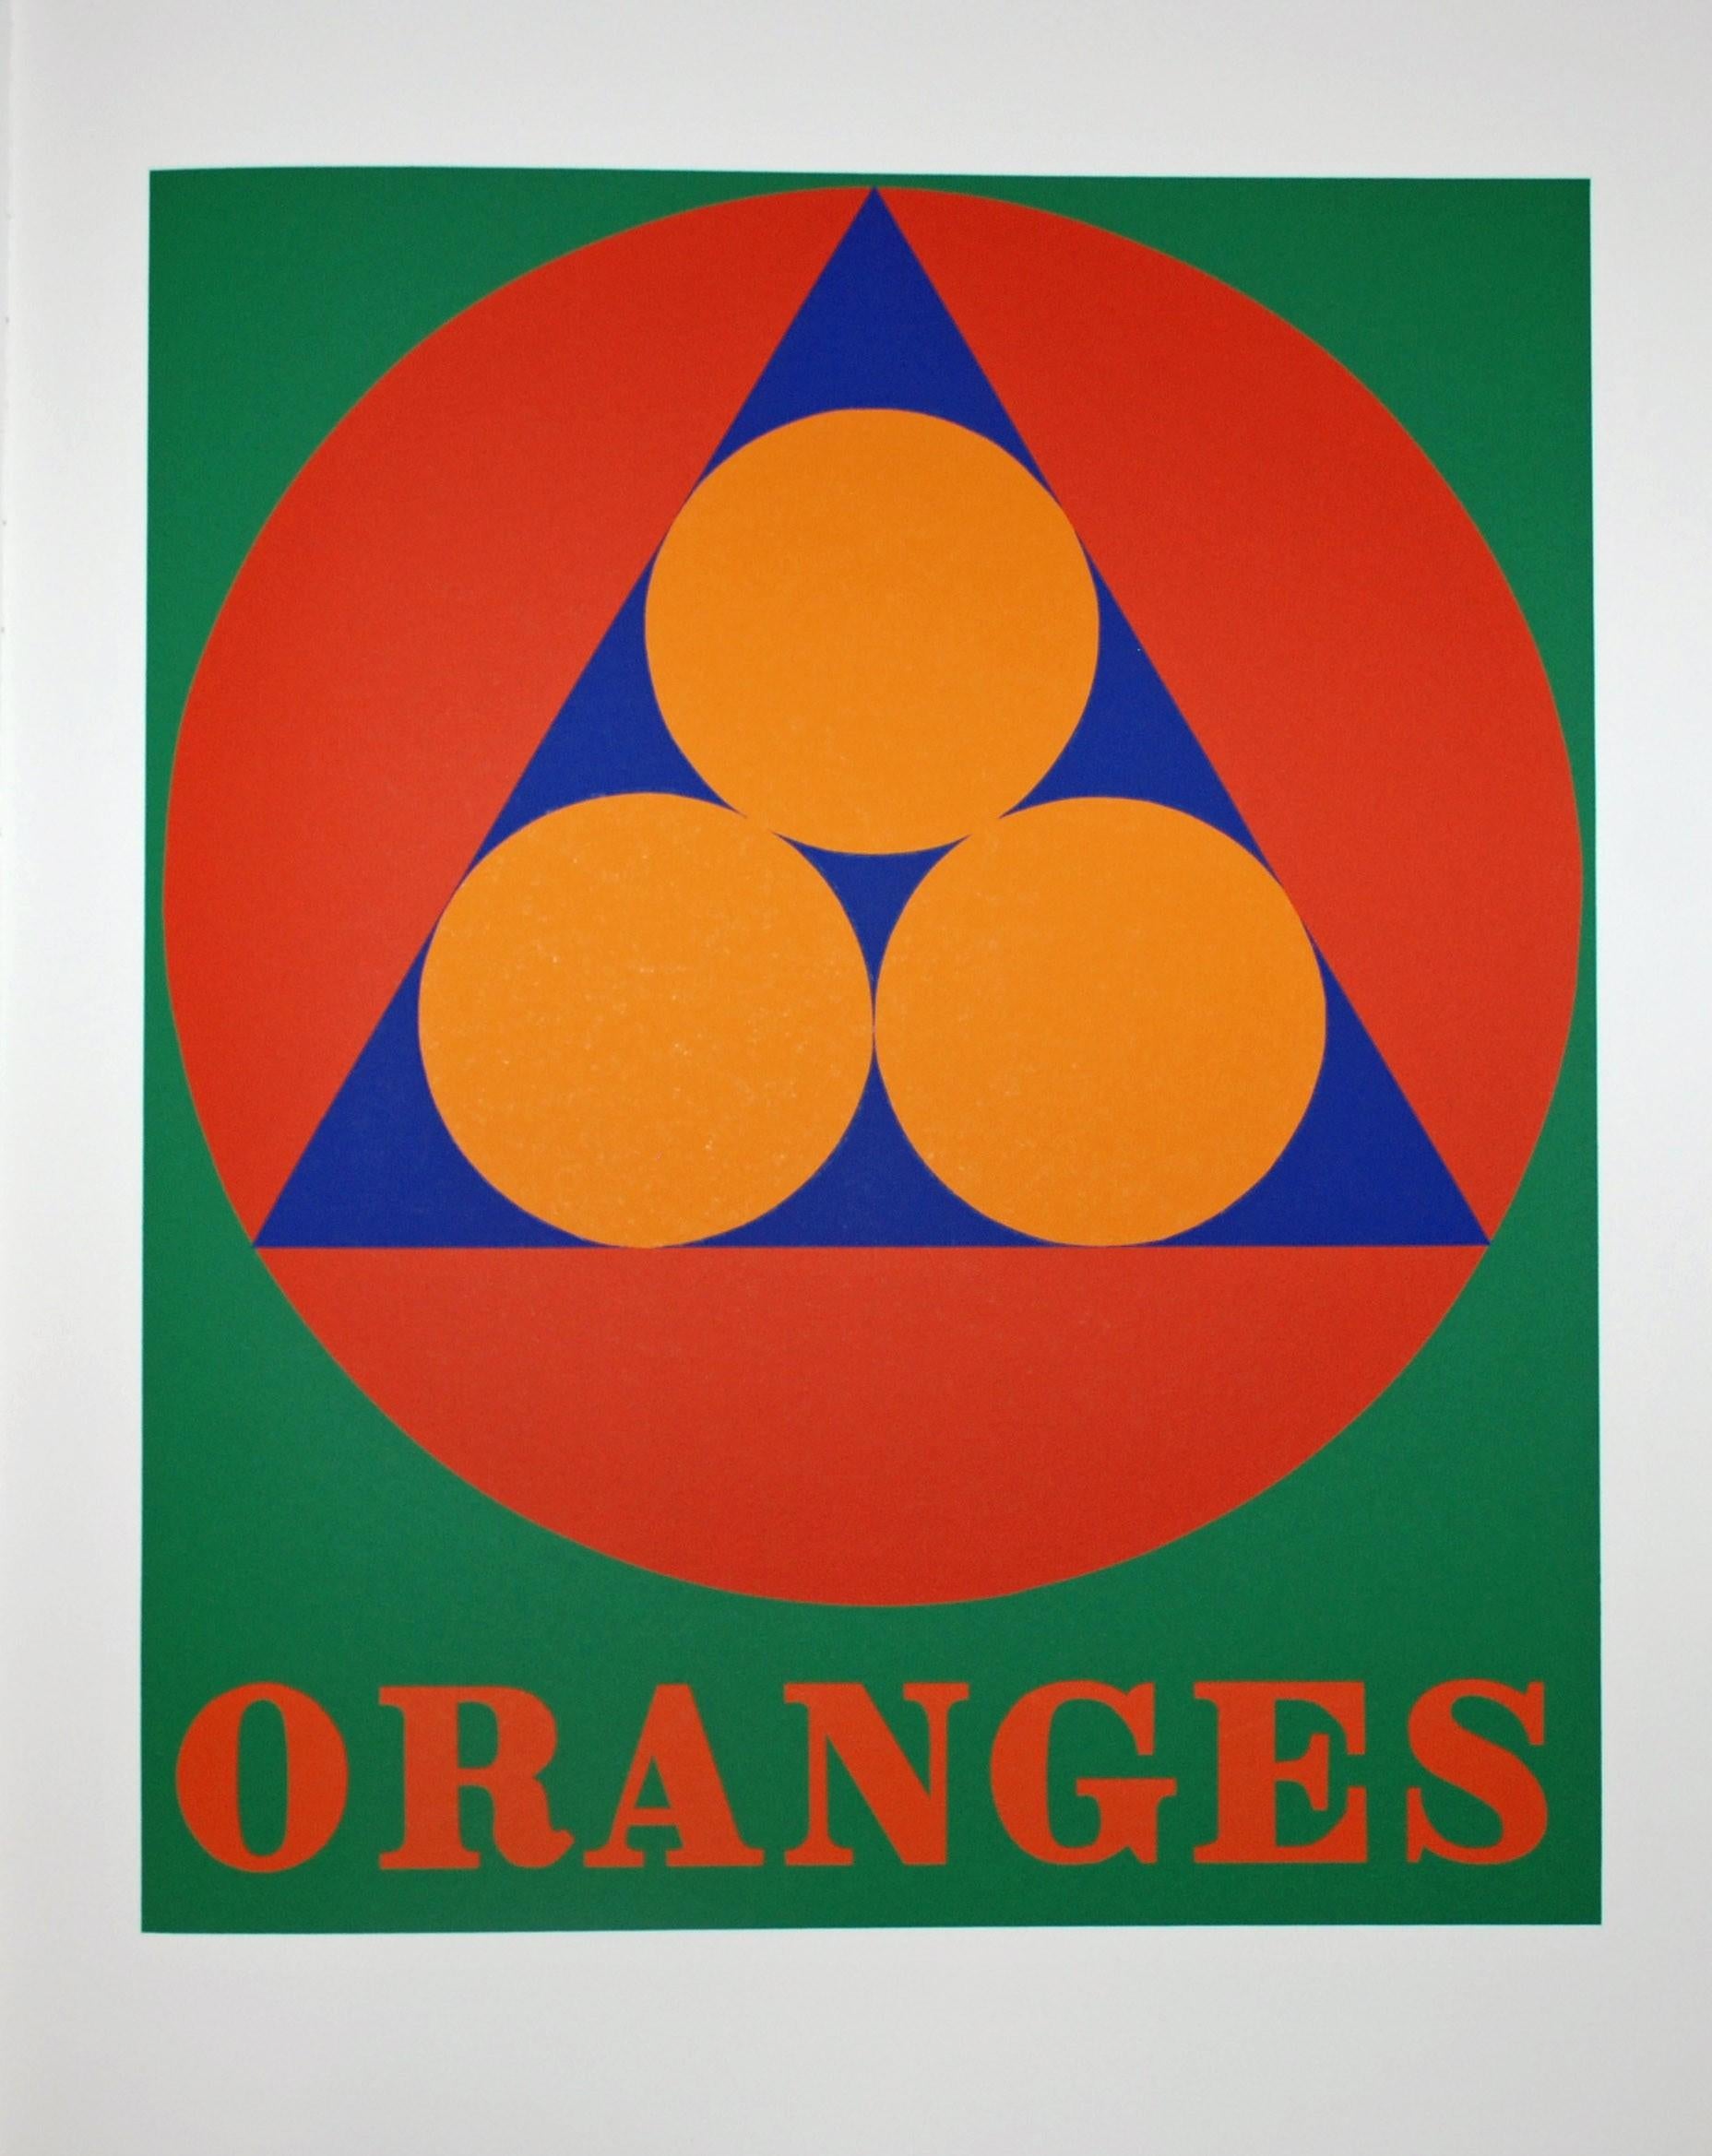 Oranges, from The American Dream - Print by Robert Indiana